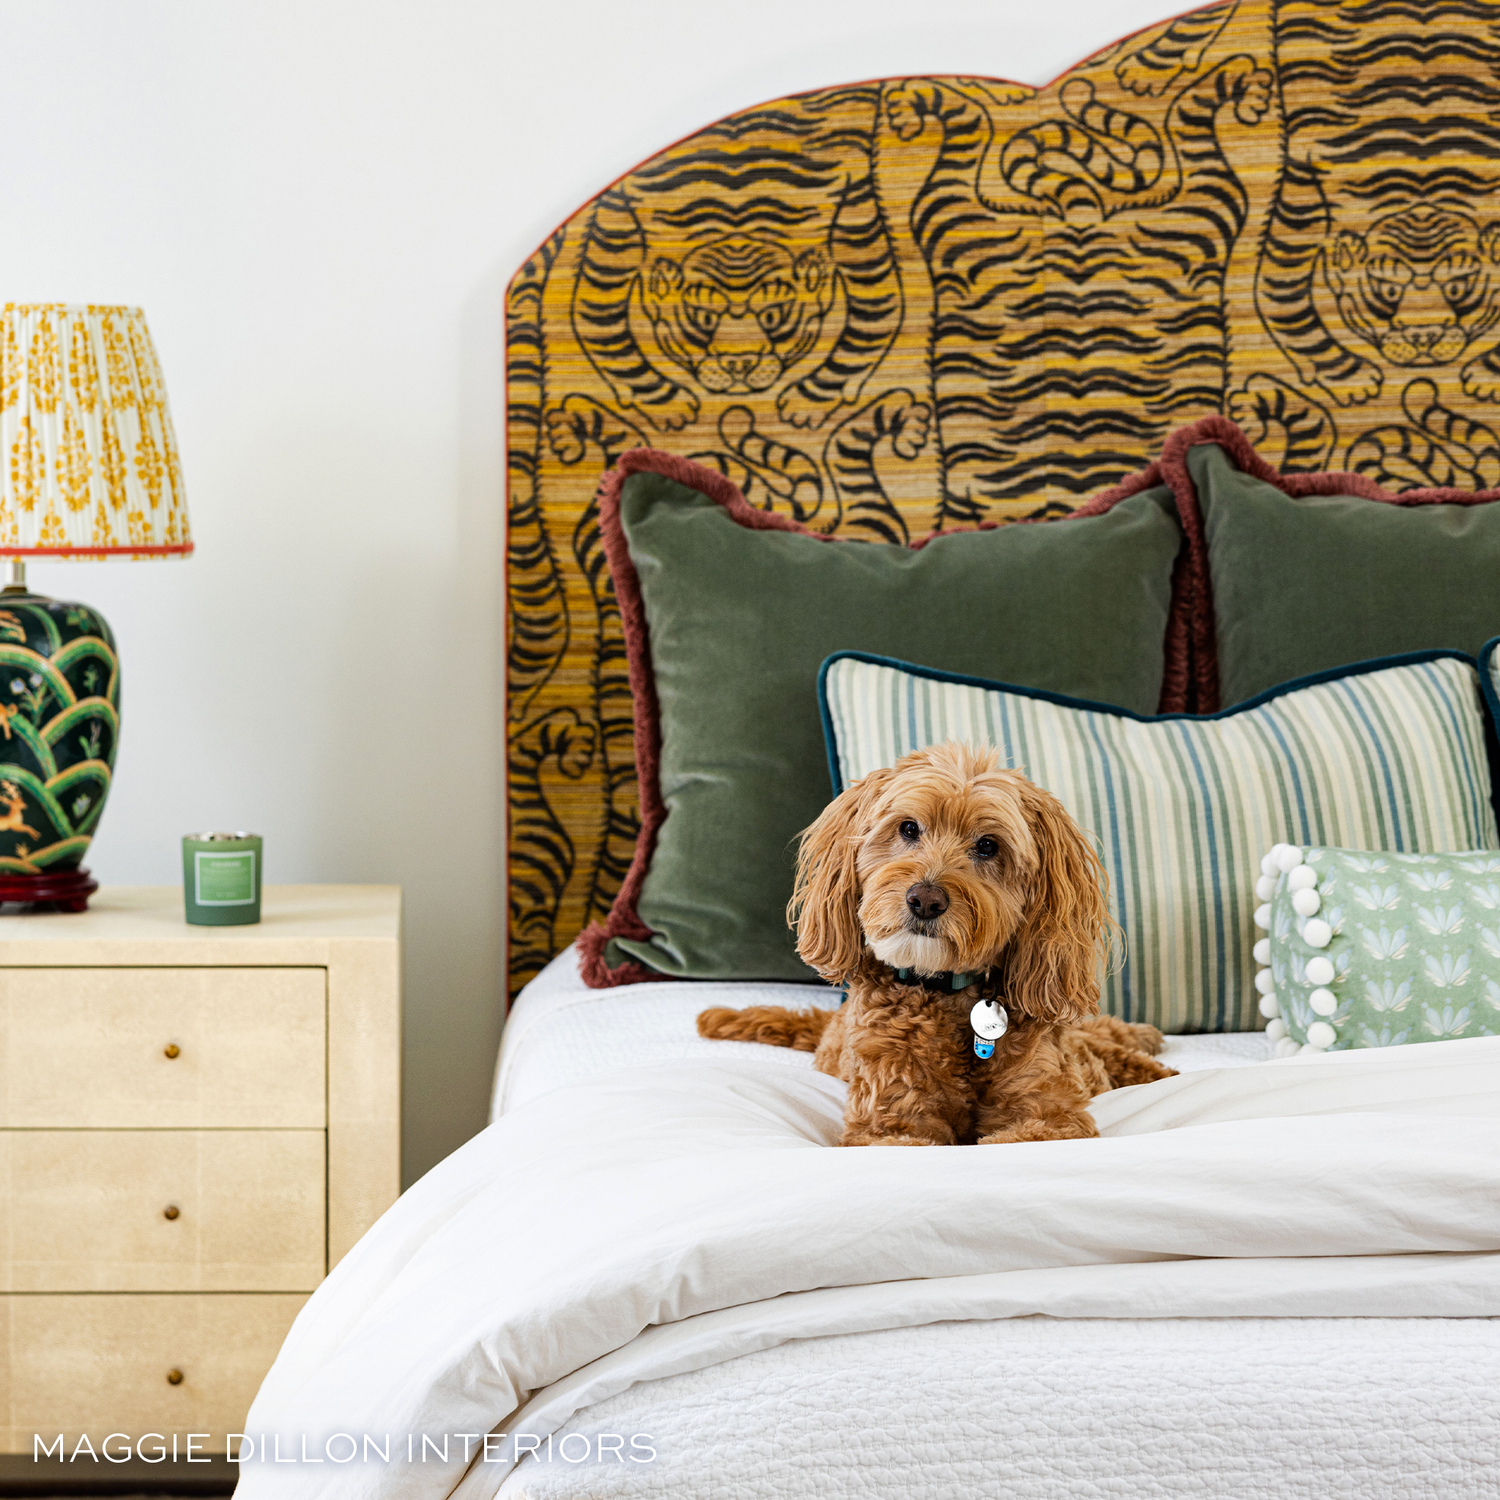 Tiger print bed stacked with green velvet pillows in the back blue and green pillows in the middle and a green and blue floral pillow in the front and a brown dog laying on the bed 